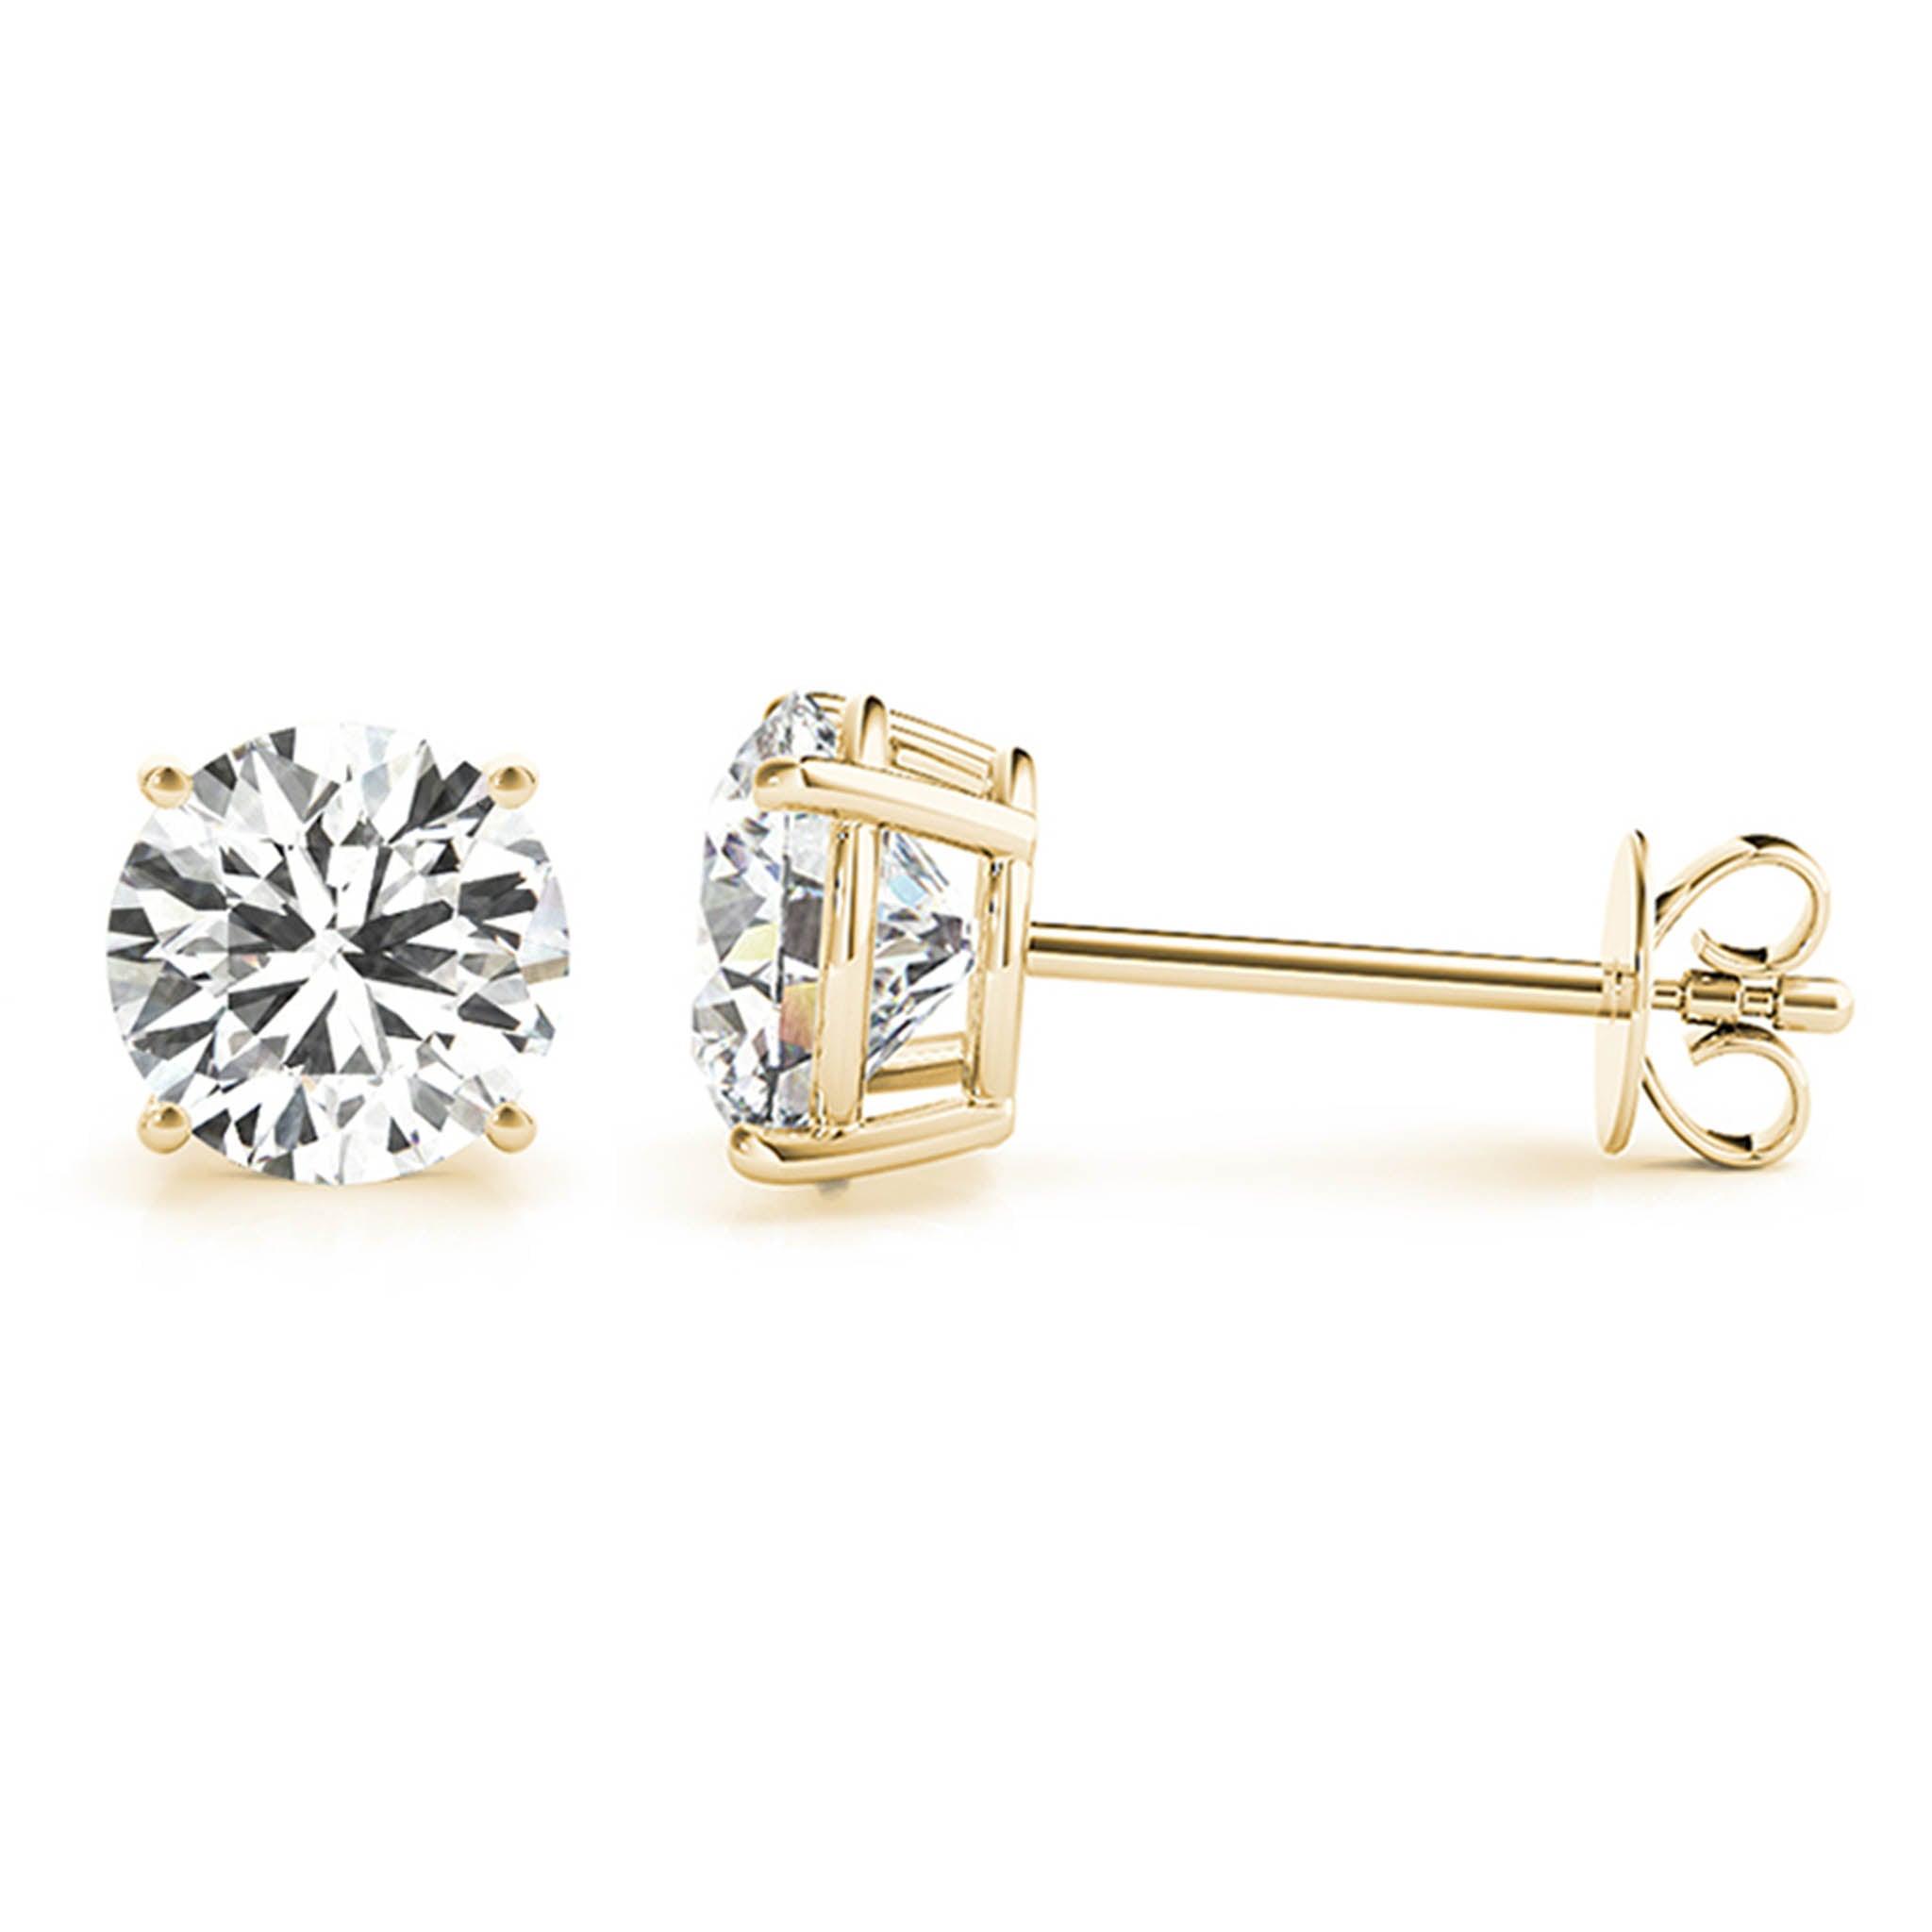 Gold Lab Grown Diamond Ear Studs / Earrings.  Total diamond weight 0.75 carats / 3/4 carat.  4 claw setting. 14ct yellow gold version. 